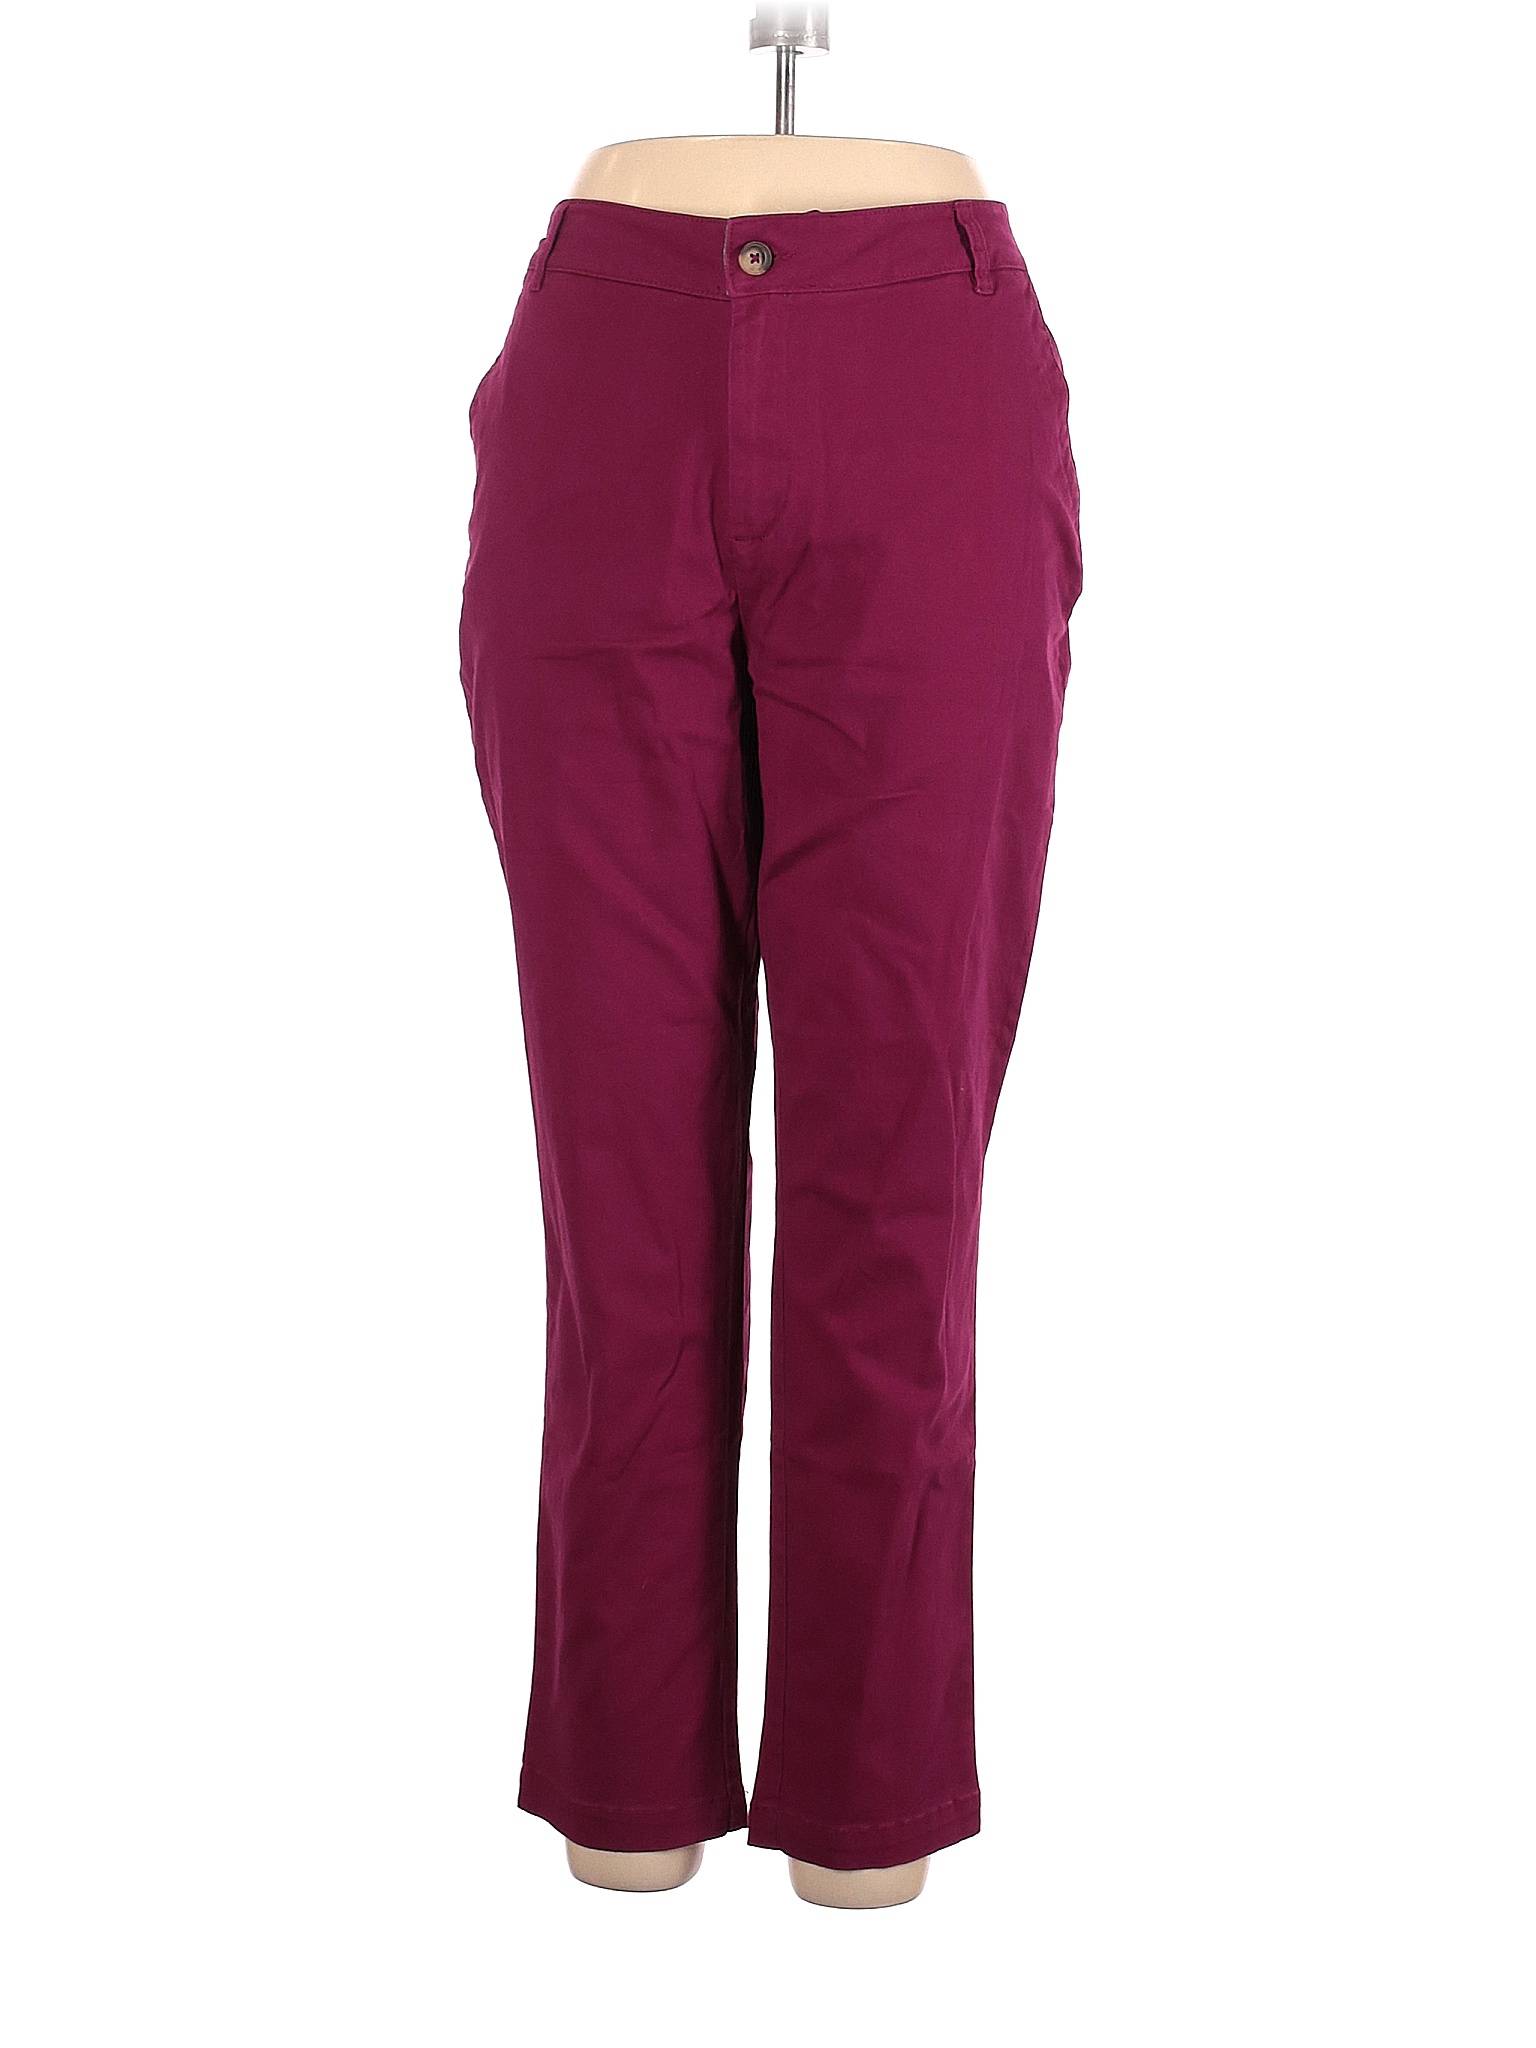 Woman Within Solid Maroon Pink Khakis Size 14 - 75% off | thredUP